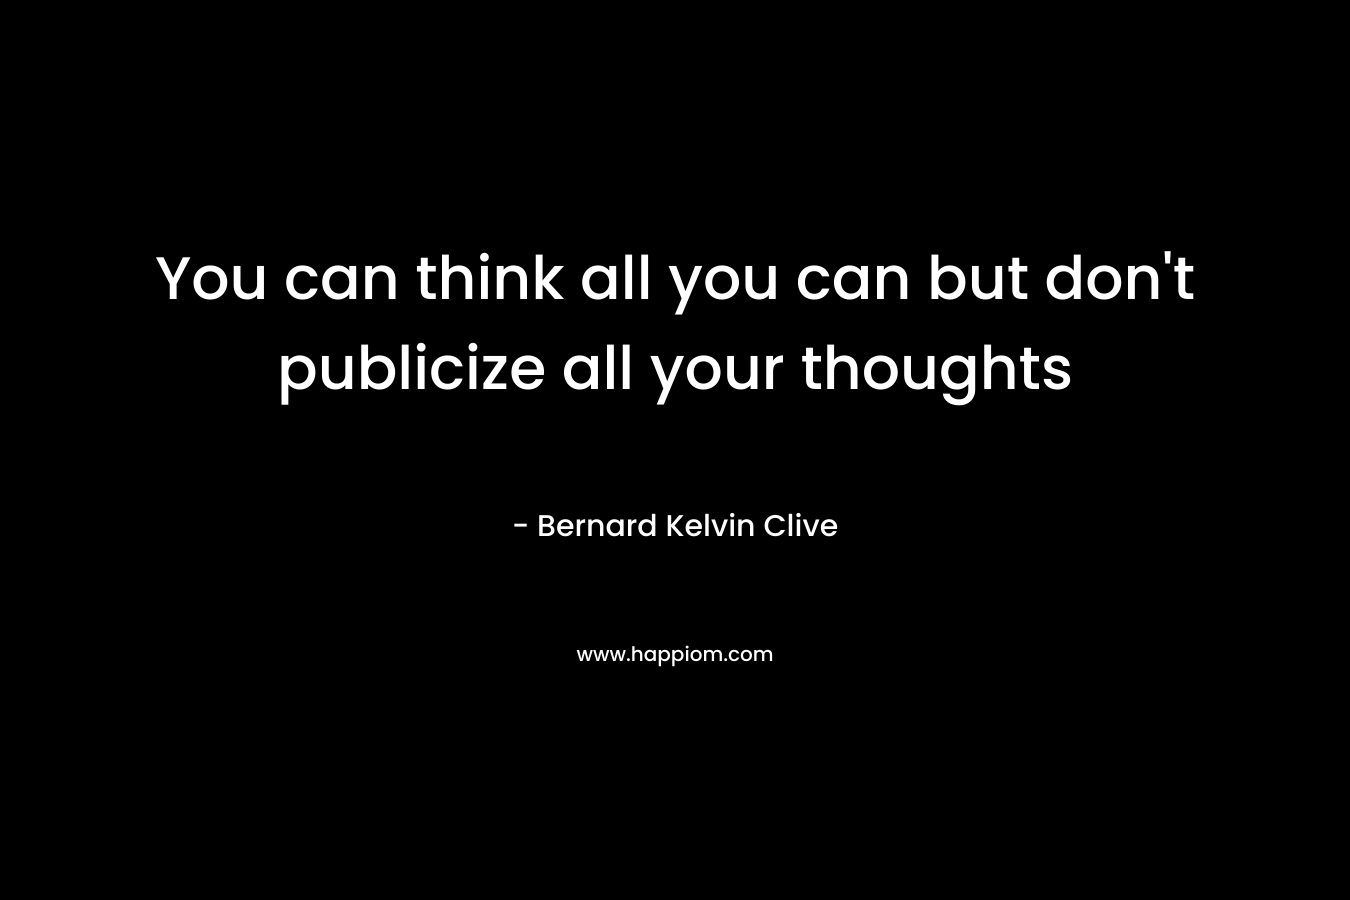 You can think all you can but don't publicize all your thoughts